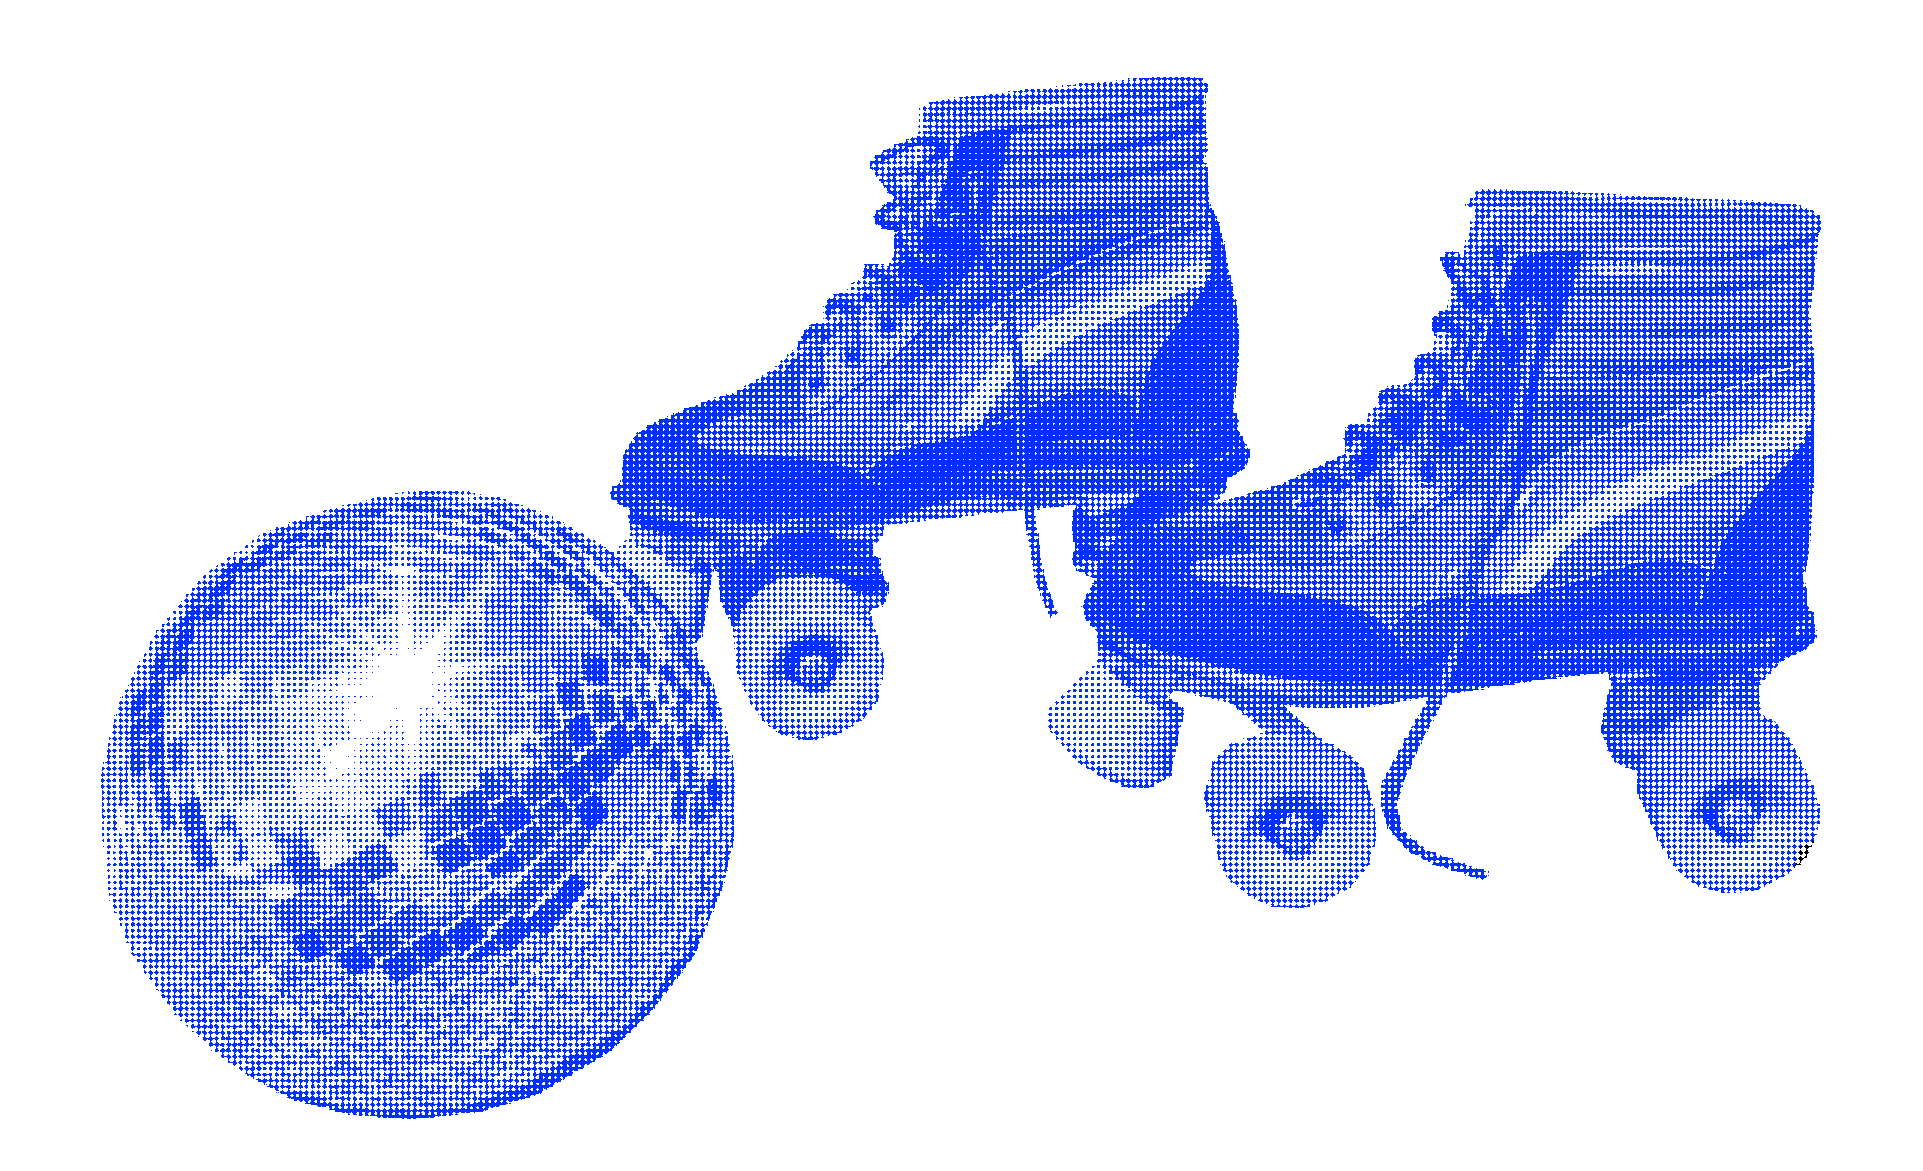 Roller-skates next to a disco ball. These two objects are synonymous with the retro aesthetic of an 80's roller rink. This aesthetic is incredibly popular and well-sought after.